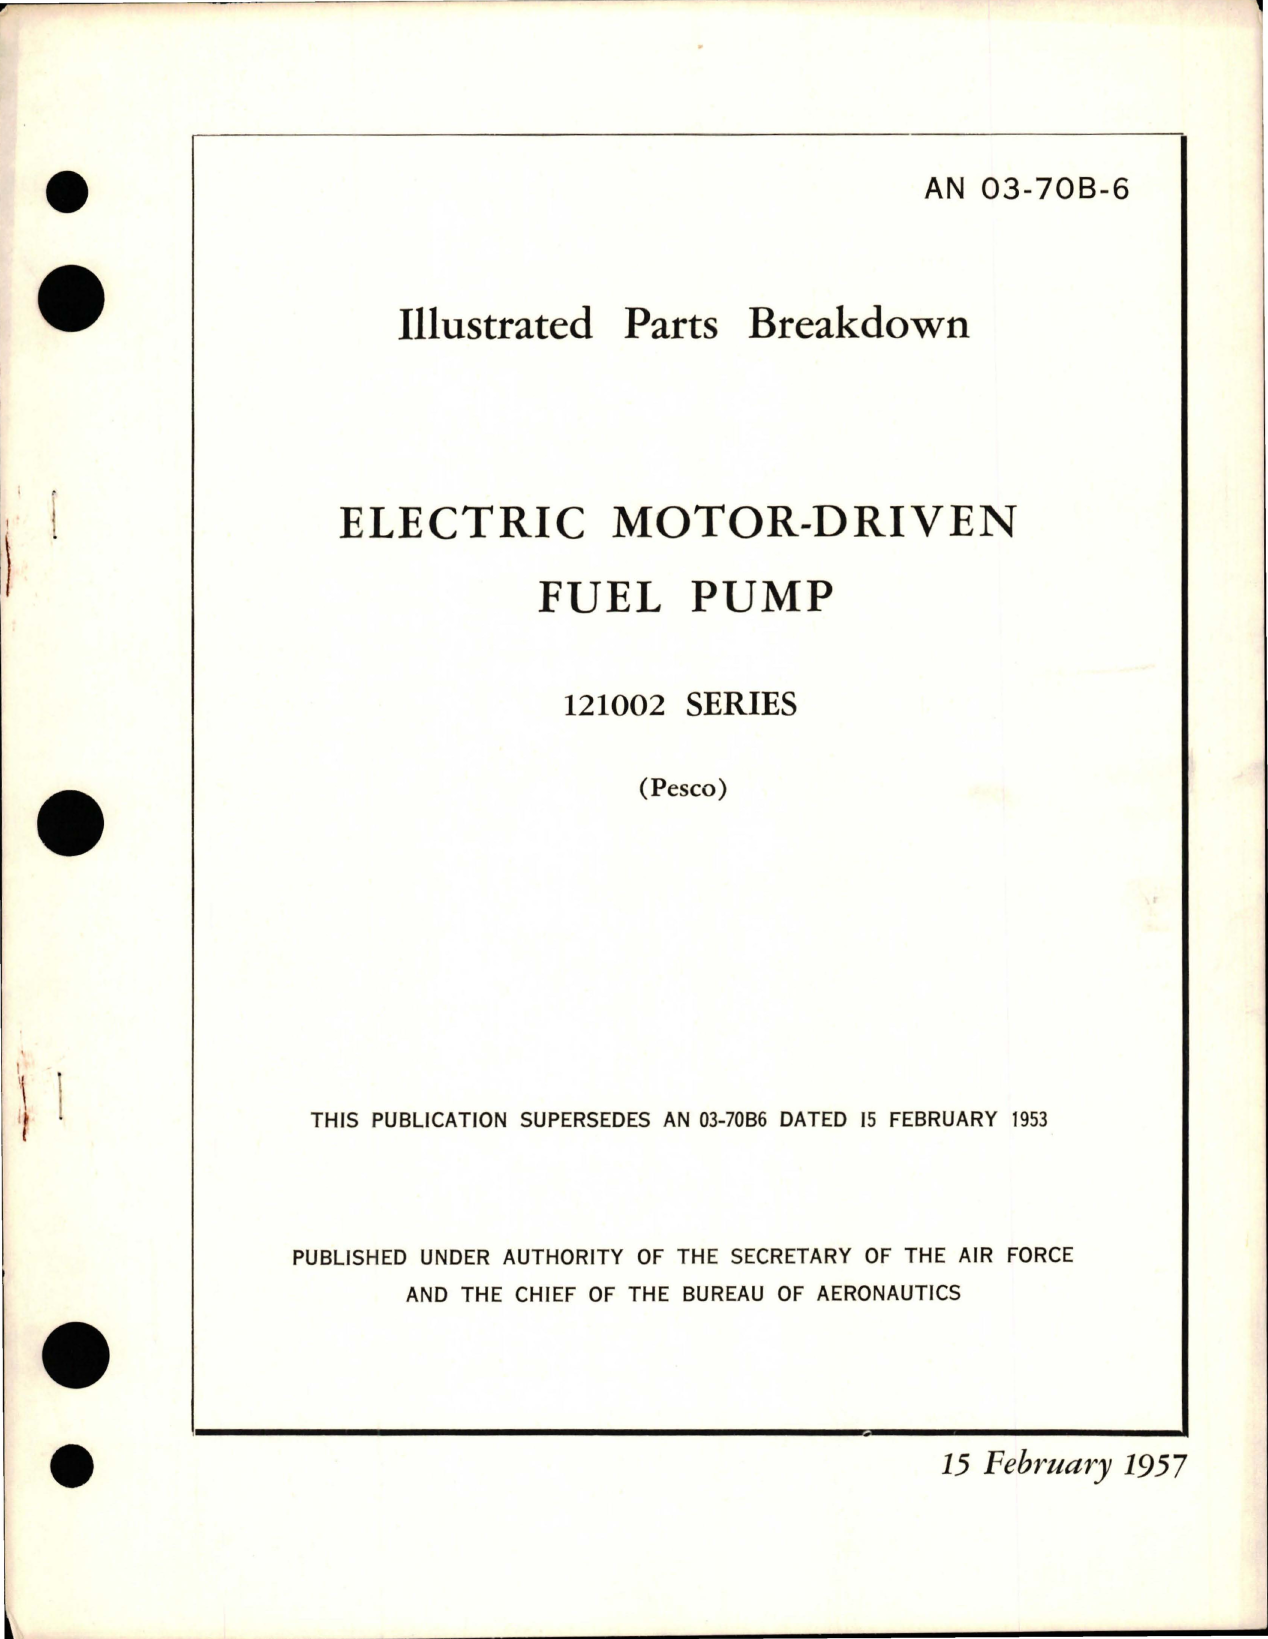 Sample page 1 from AirCorps Library document: Illustrated Parts Breakdown for Electric Motor Driven Fuel Pump - 121002 Series 